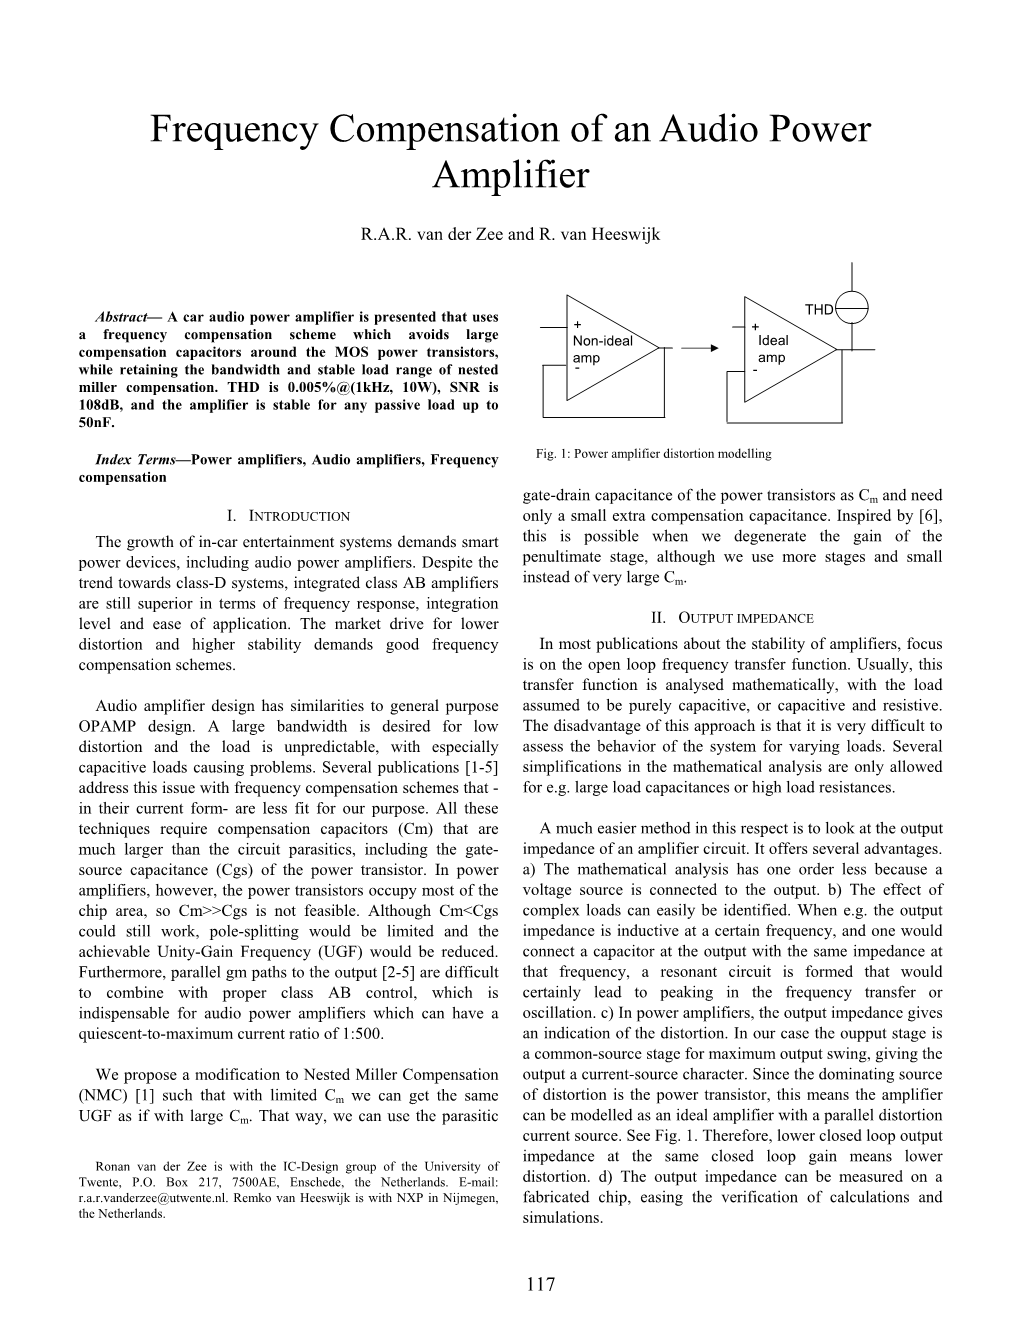 Frequency Compensation of an Audio Power Amplifier